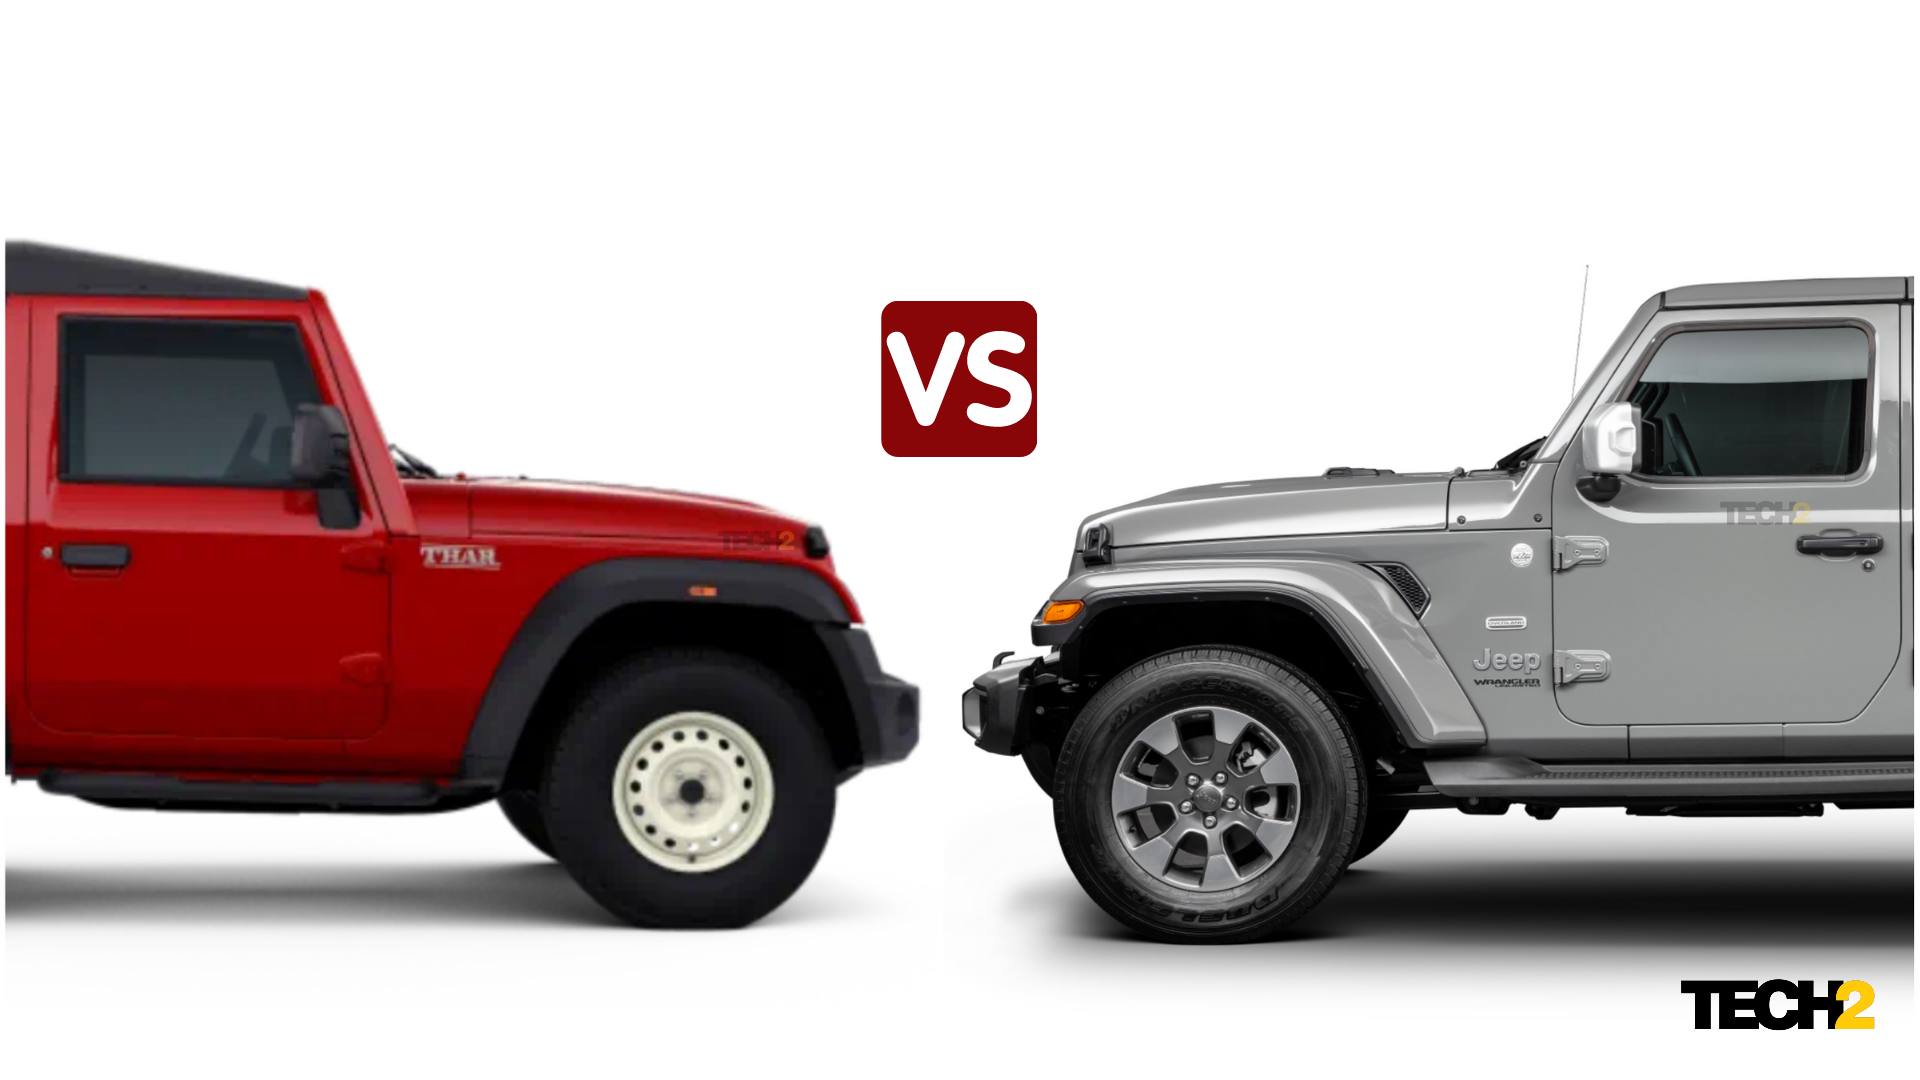 In visual terms, the second-gen Mahindra Thar is closely linked to the iconic Jeep Wrangler. Image: Tech2/Amaan Ahmed